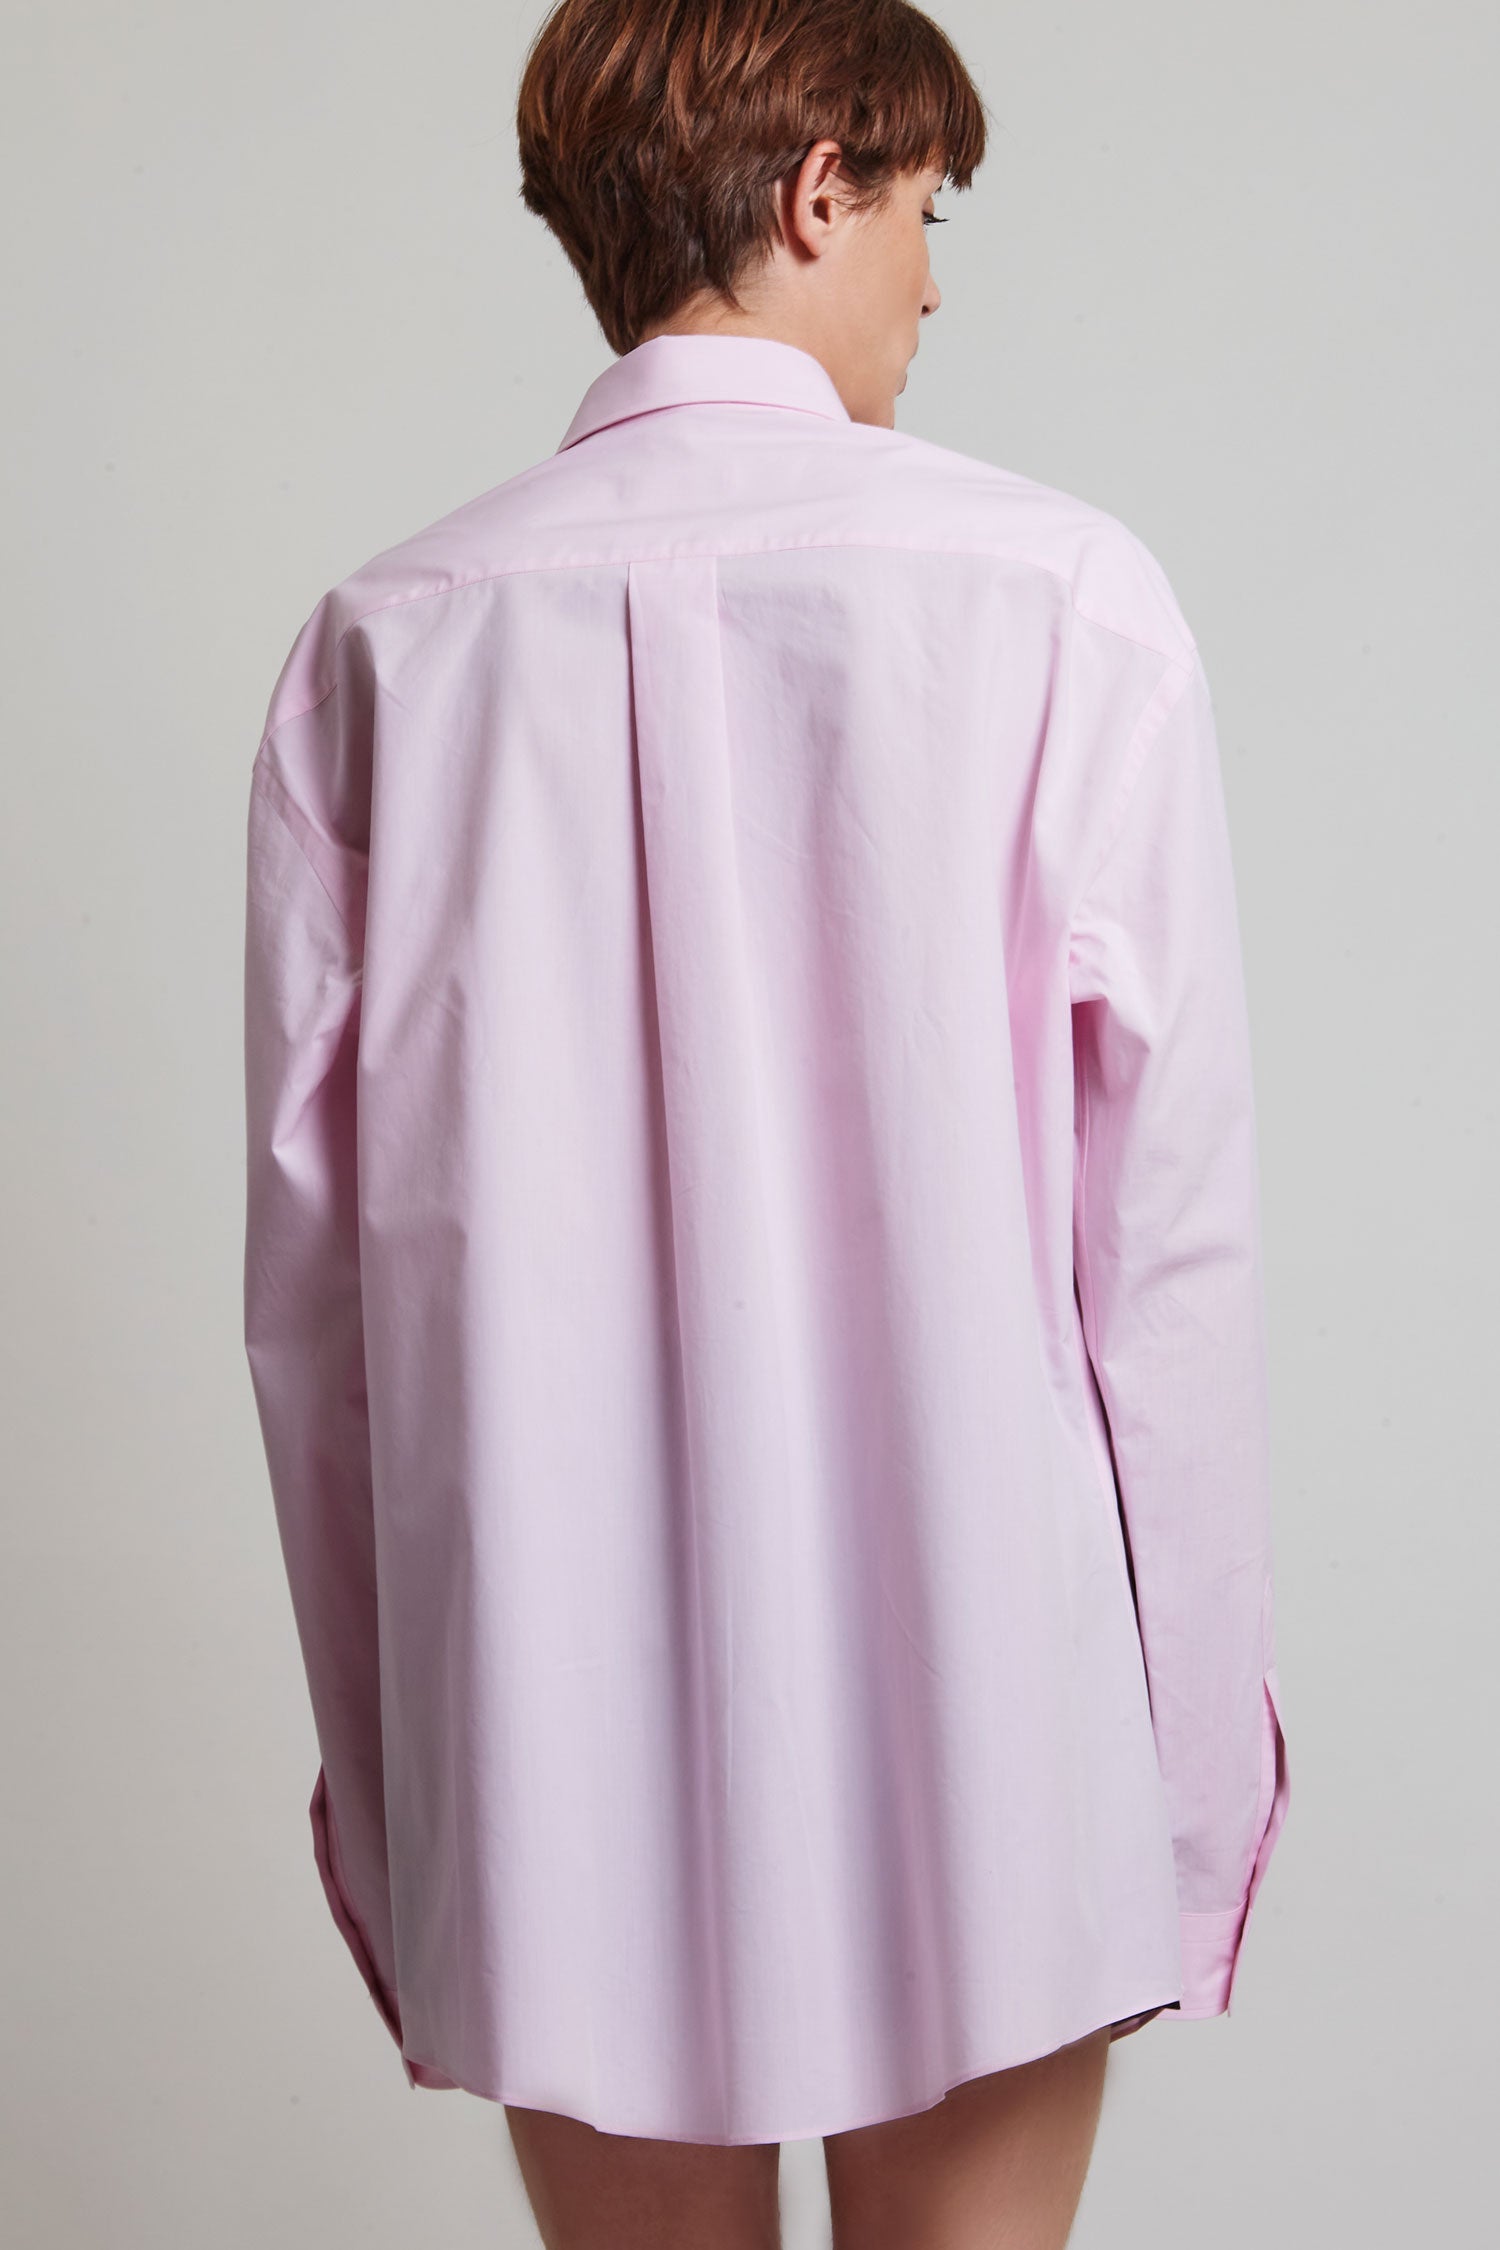 Oversized Classic Shirt in super soft cotton- PINK edition – INES